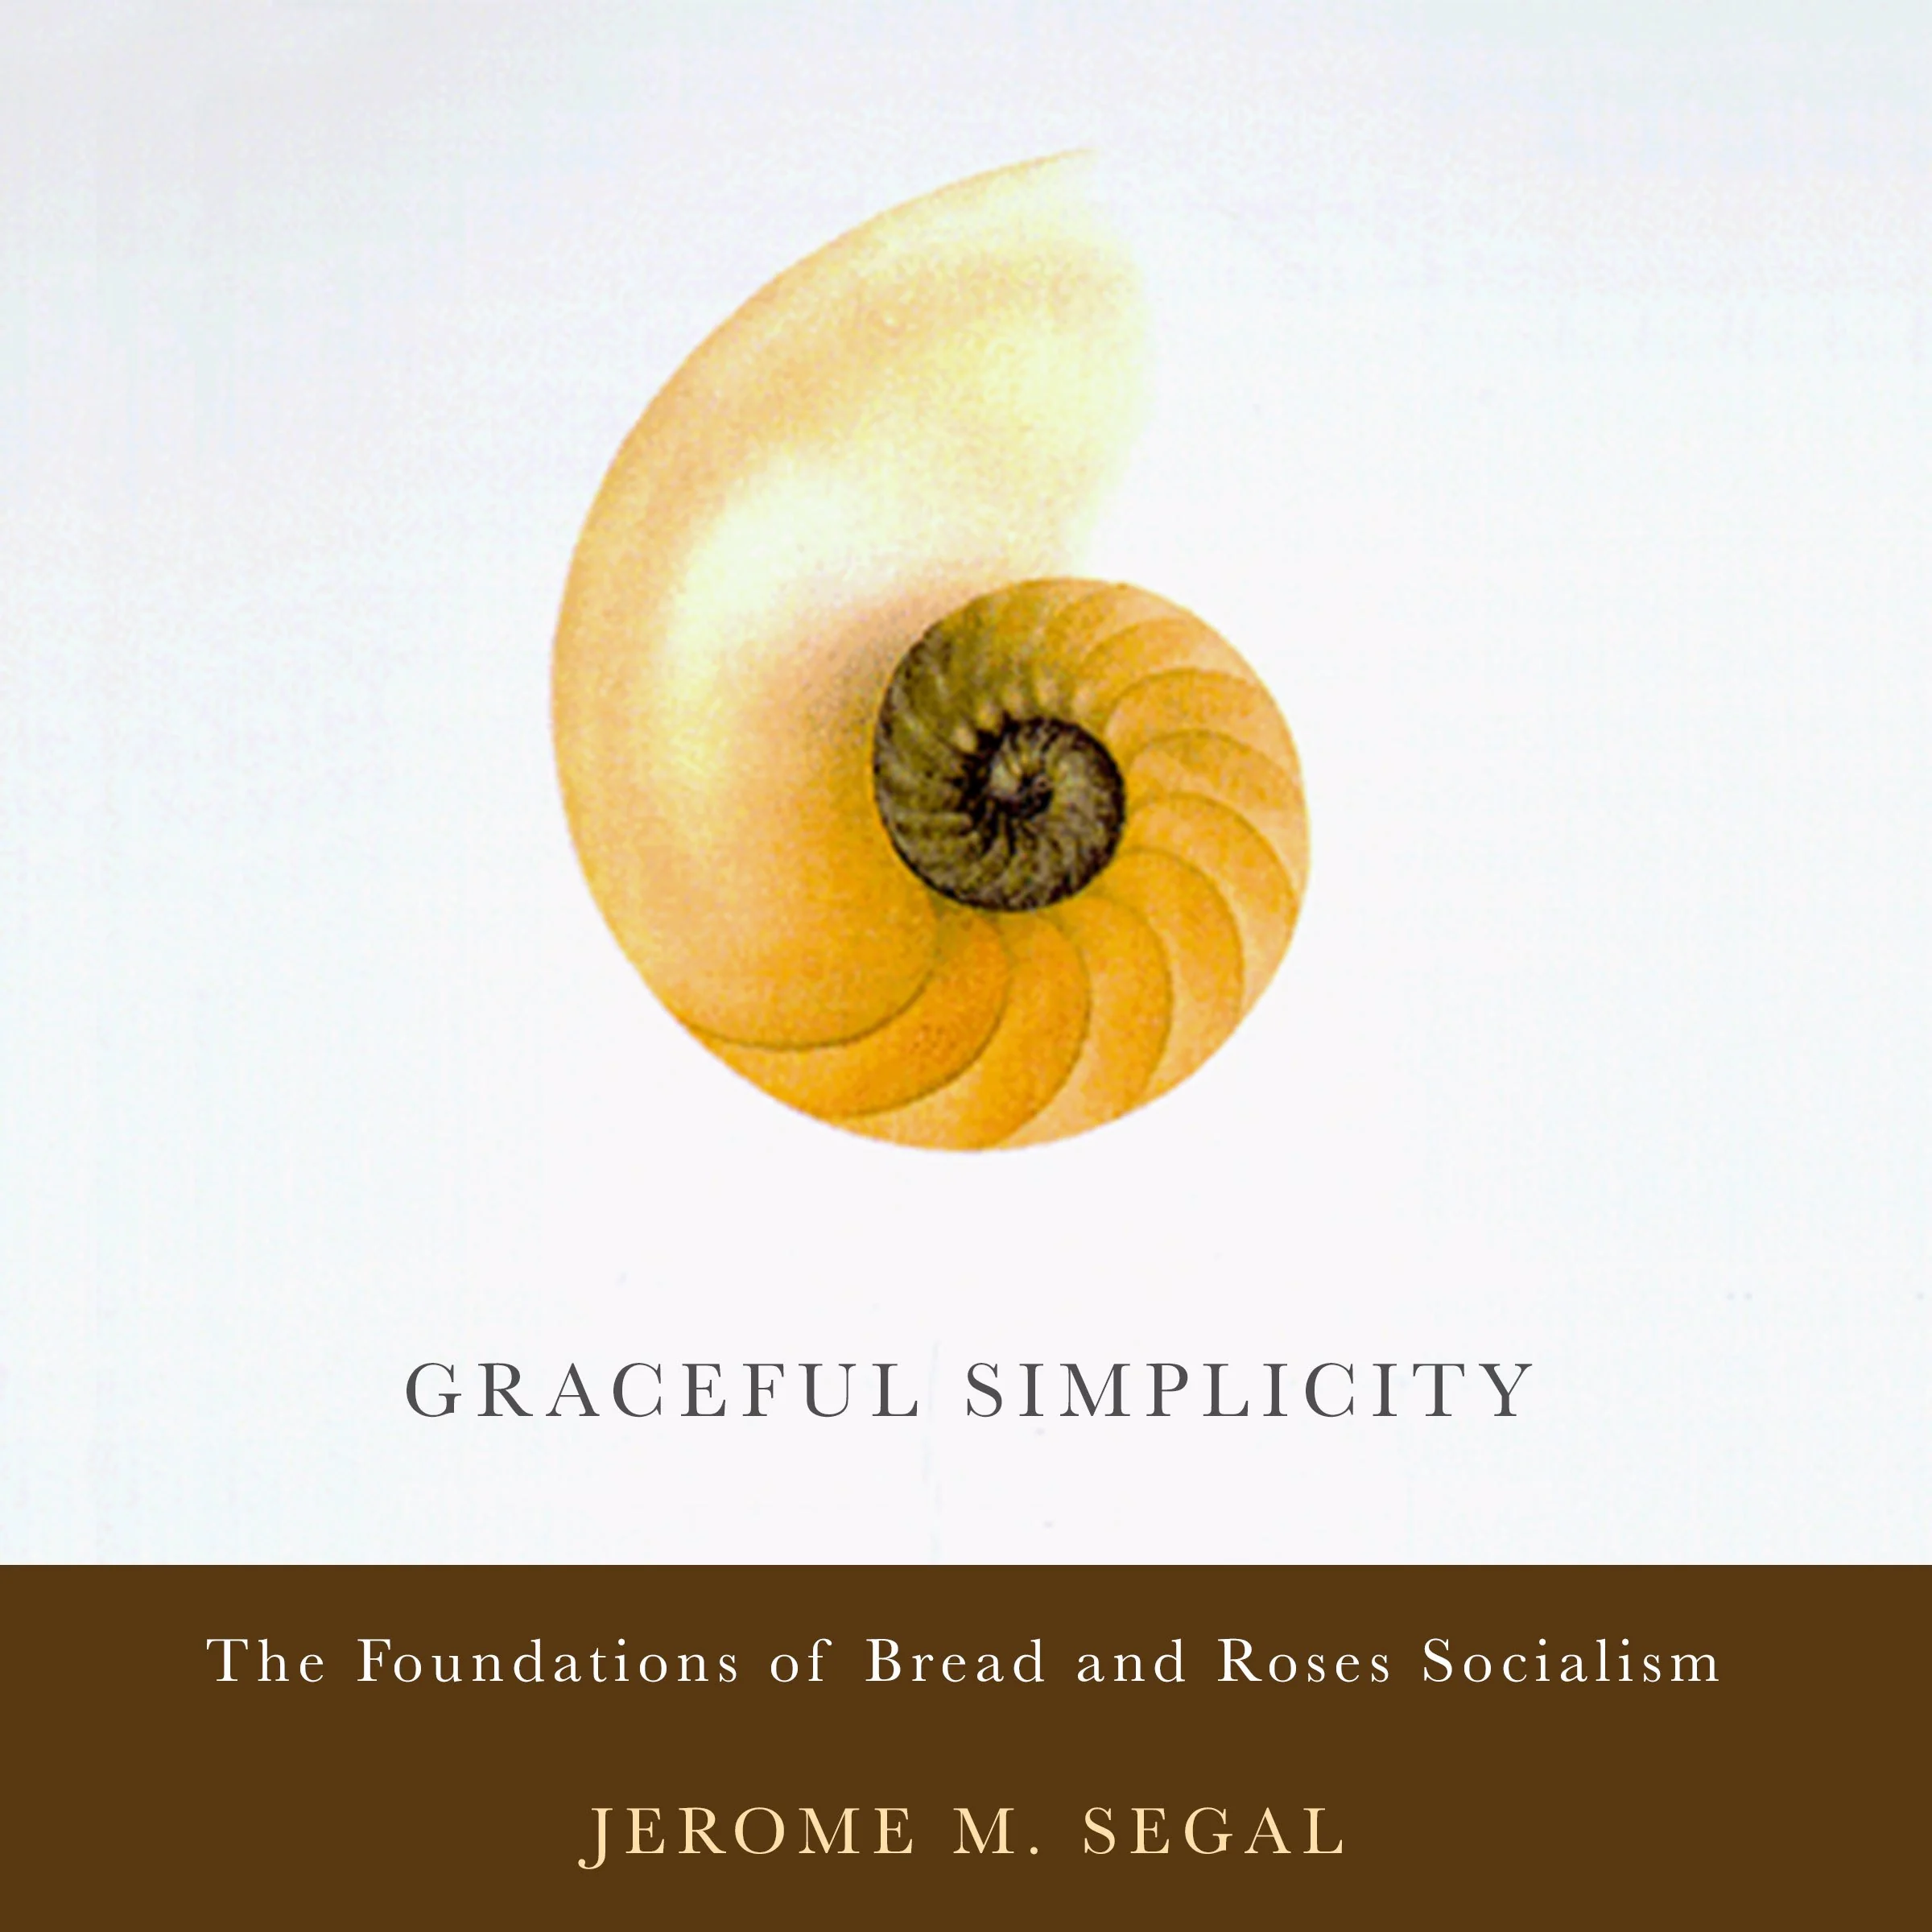 Graceful Simplicity Audiobook by Jerome M. Segal